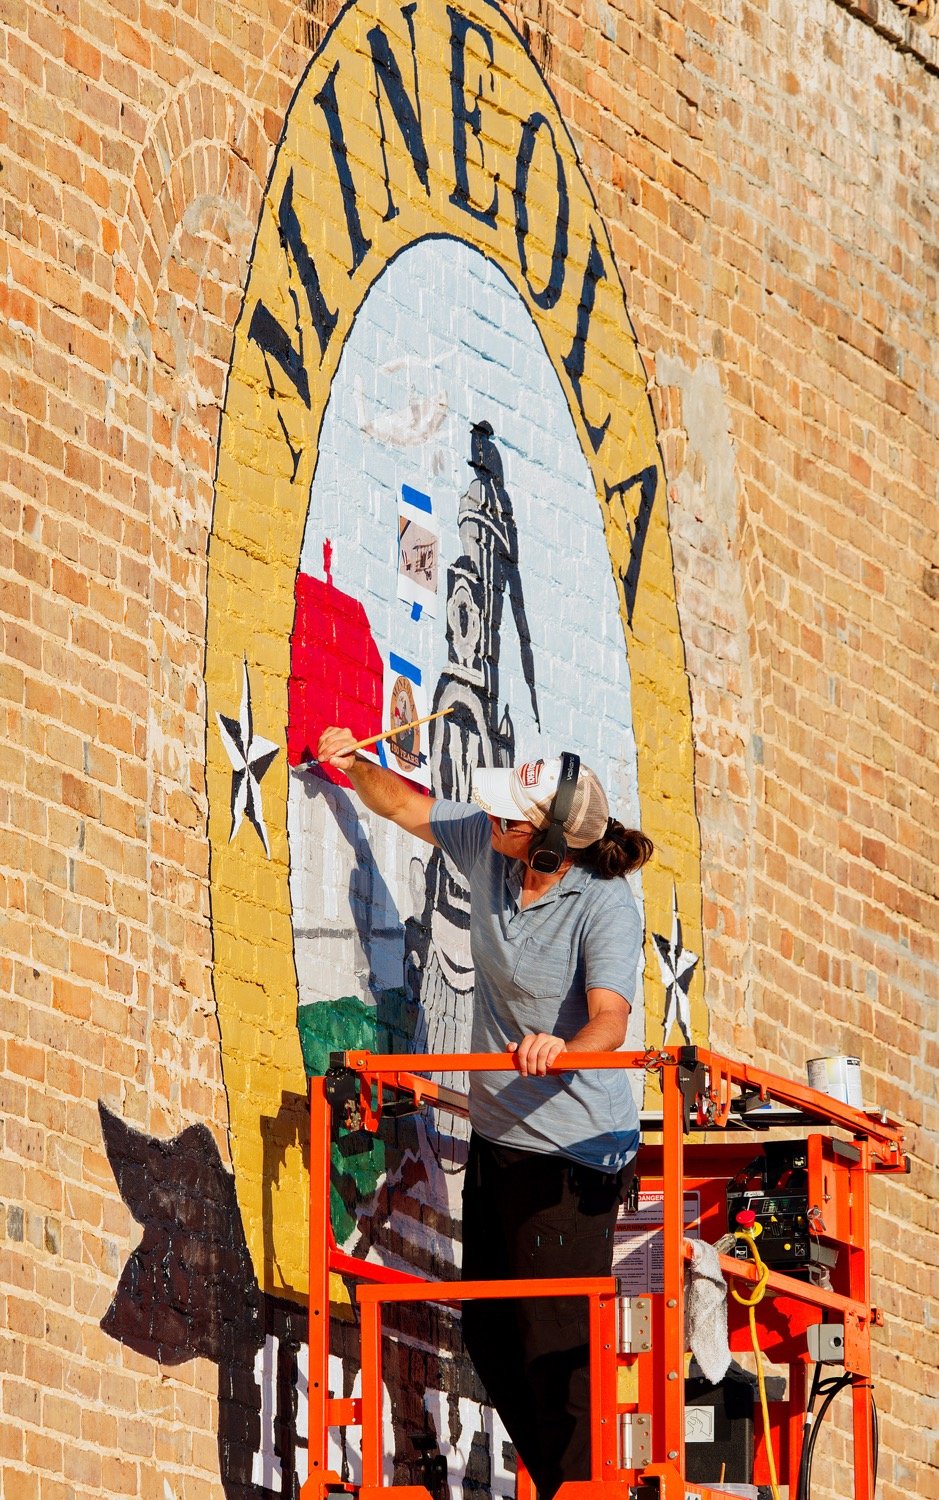 Erica Fry is completing the 150th anniversary (sesquicentennial) logo on S. Johnson St. for the city of Mineola in anticipation of a year-long series of events surrounding the city’s founding in May 1873. [look at logo progress]